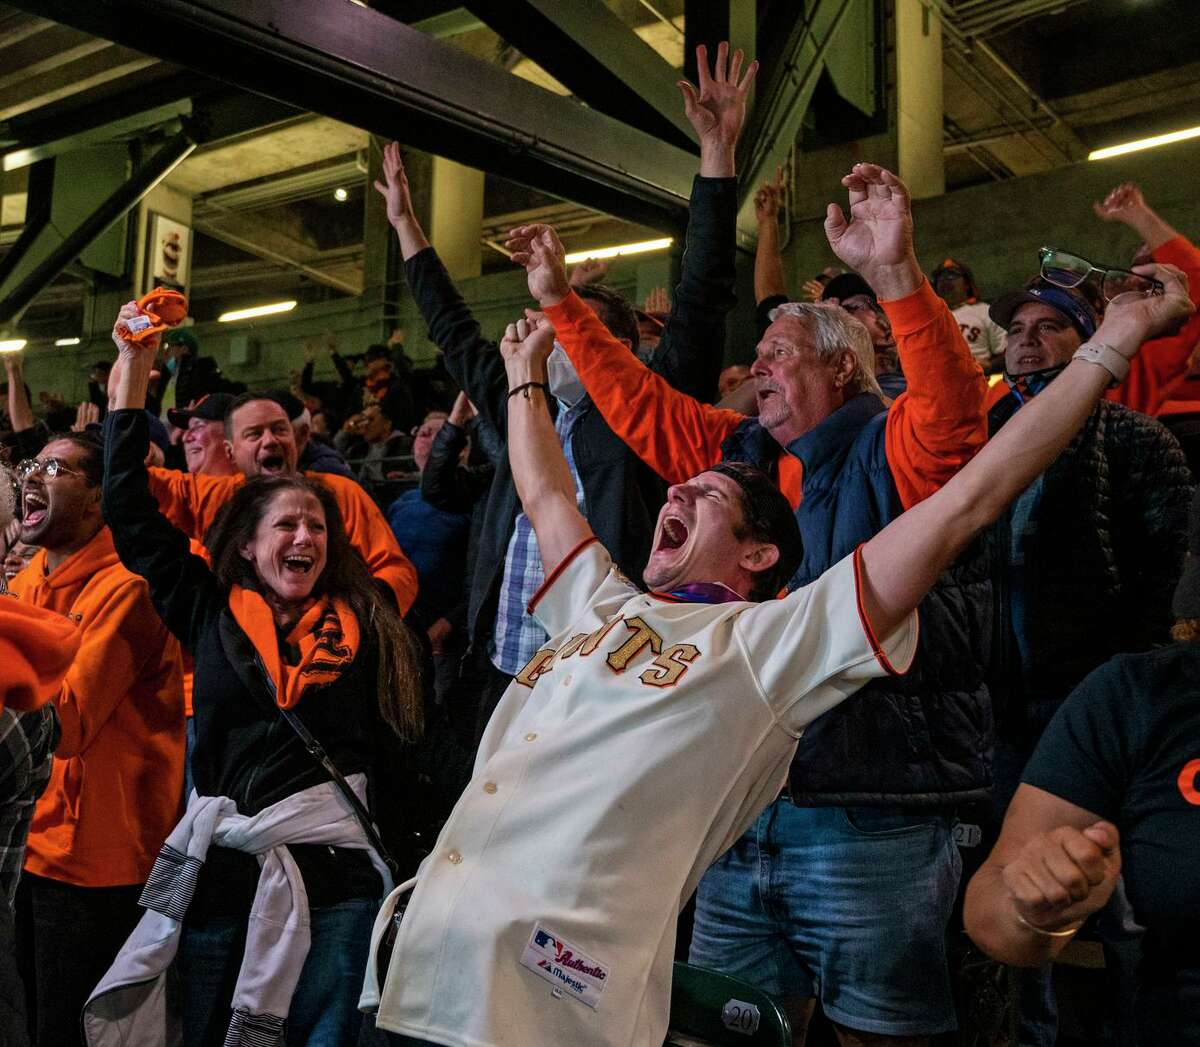 Tony and Michele Lewis of Saratoga react with joy as the Giants score in the 6th inning of Game 5 of the San Francisco Giants vs the Los Angeles Dodgers National League Division Series at Oracle Park. Photographed in San Francisco, California on October 14, 2021.